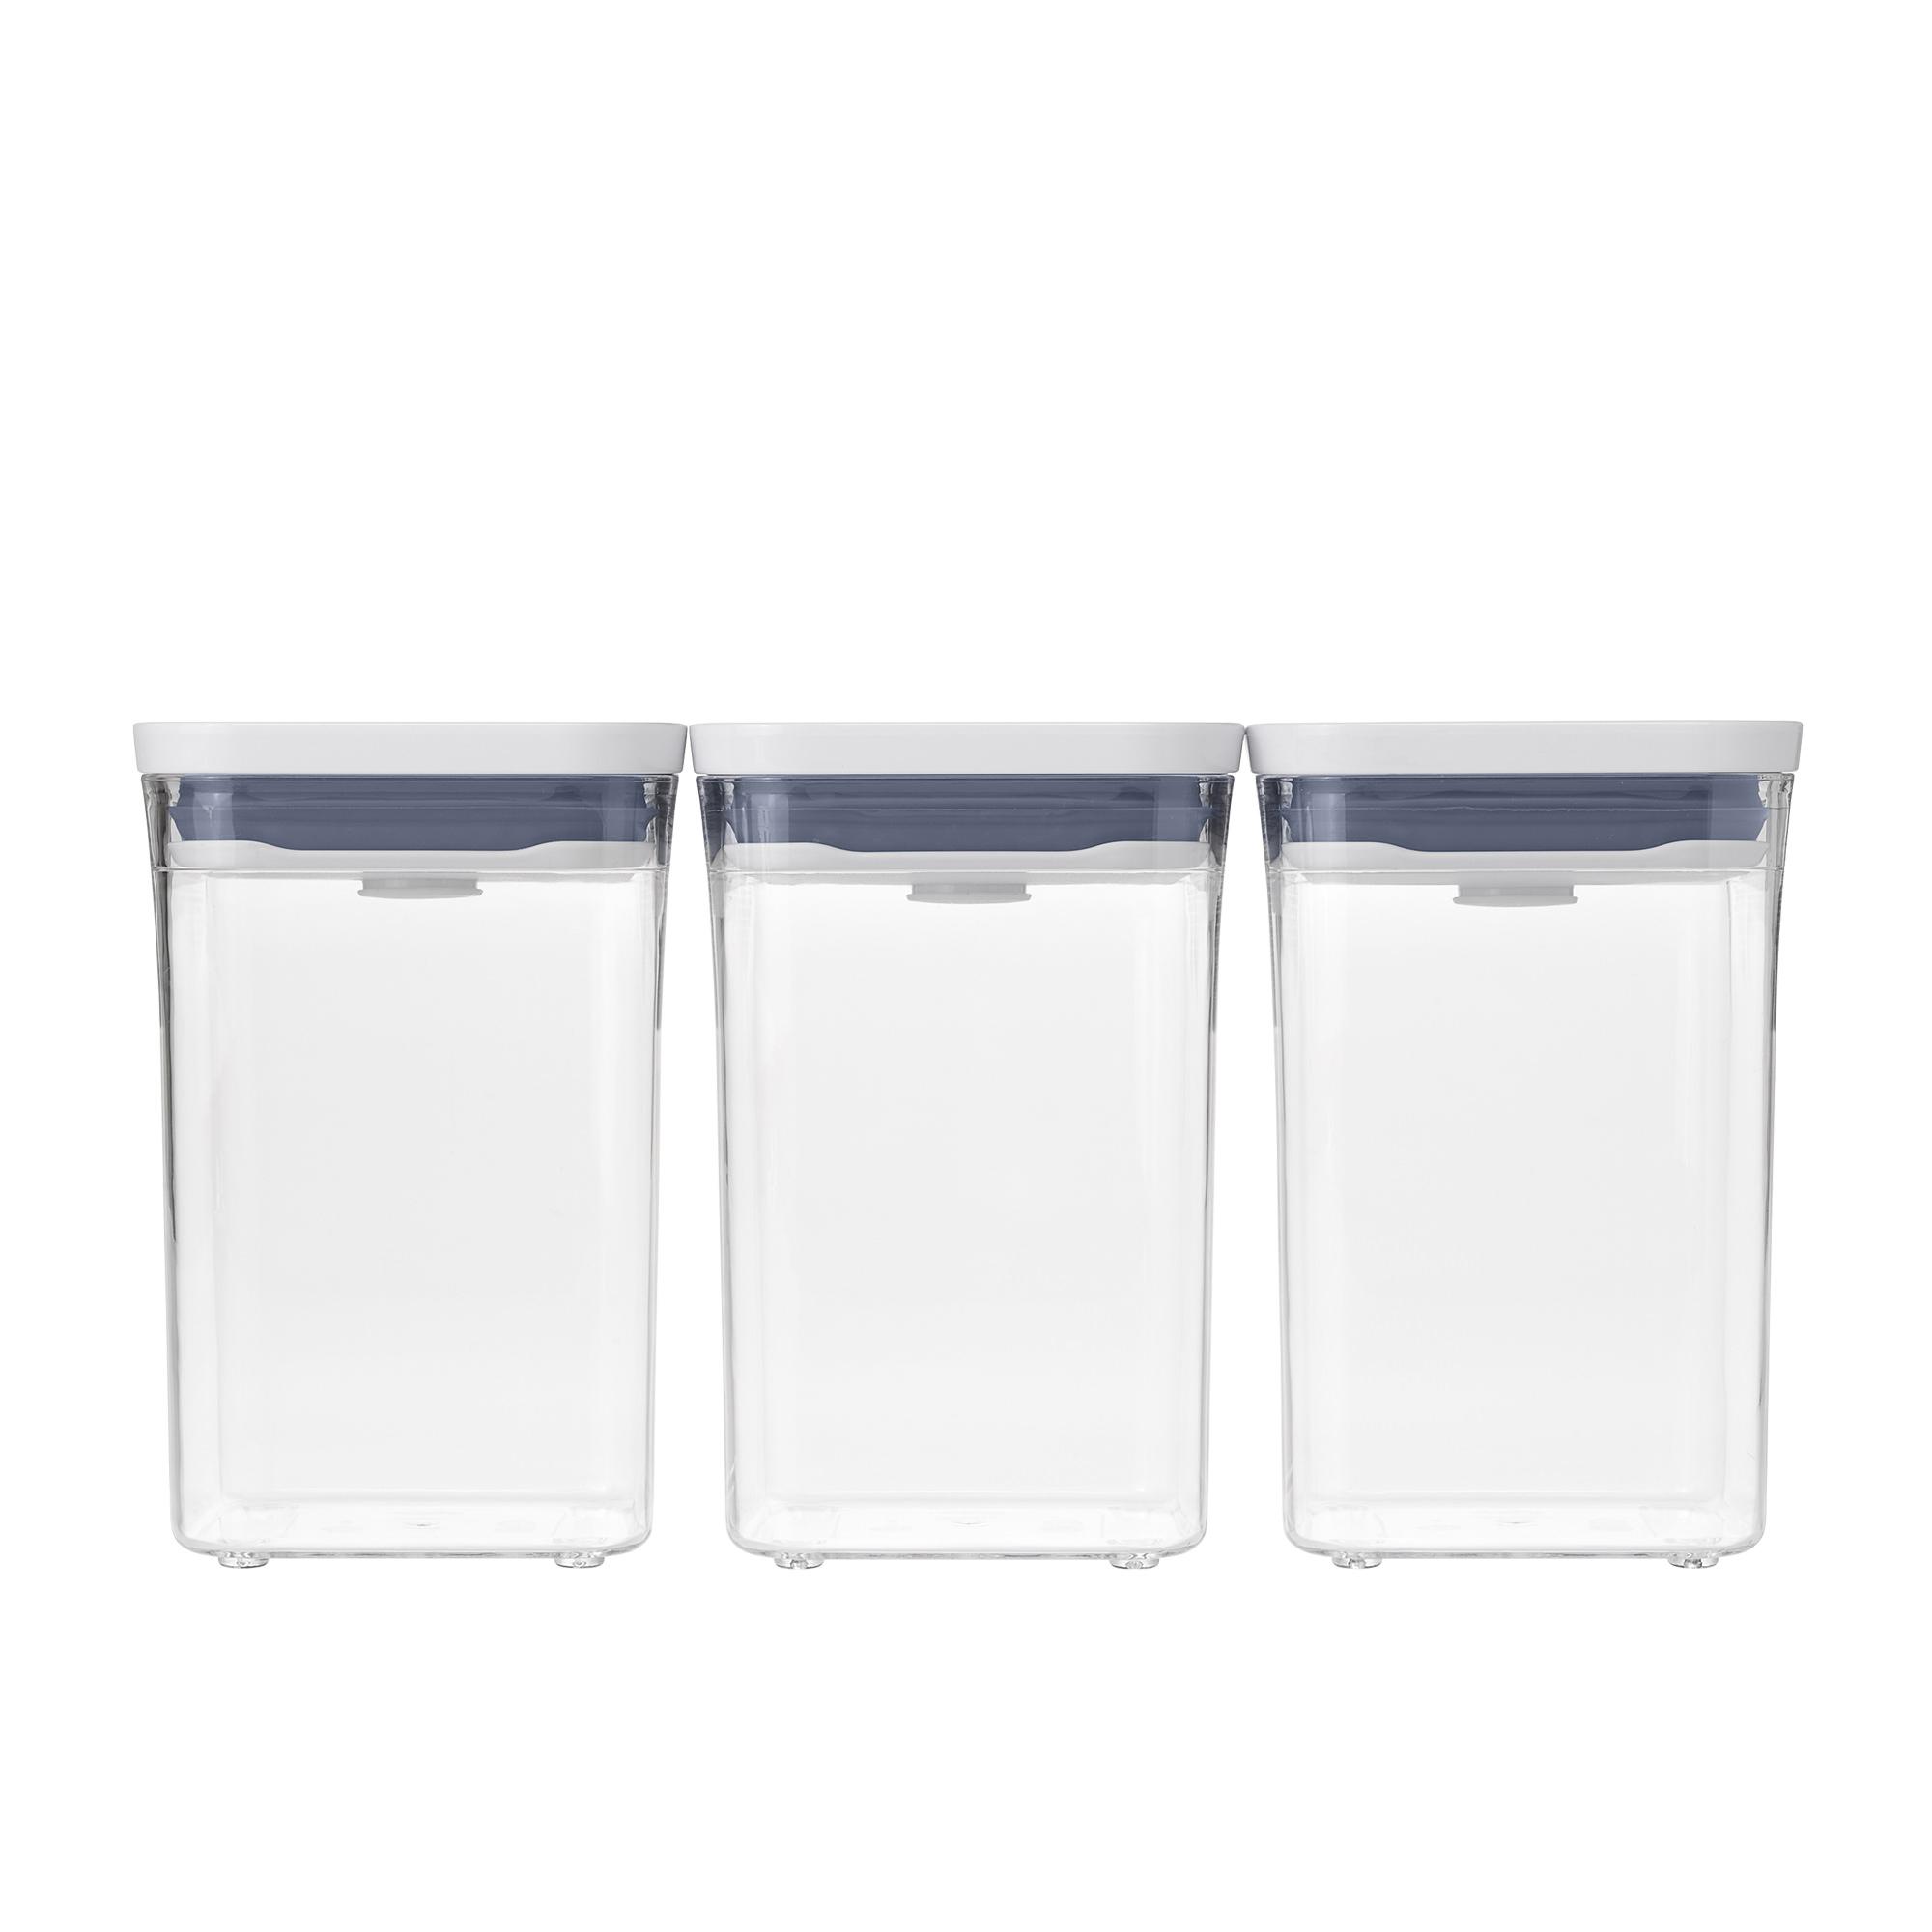 OXO Good Grips Square Pop 2.0 Container Set 3pc Image 6